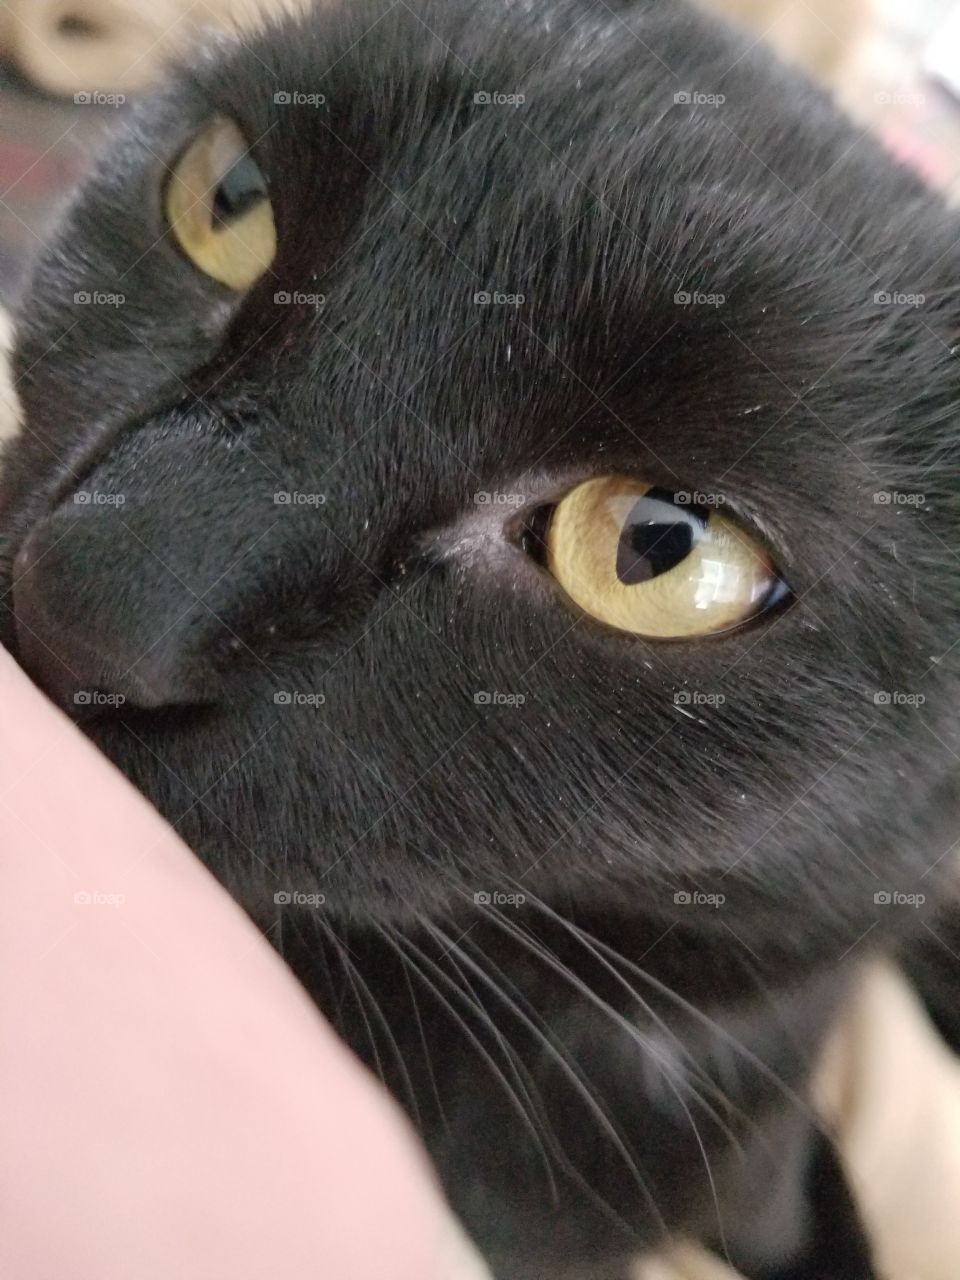 Daisy, our black cat, giving kitty kisses.